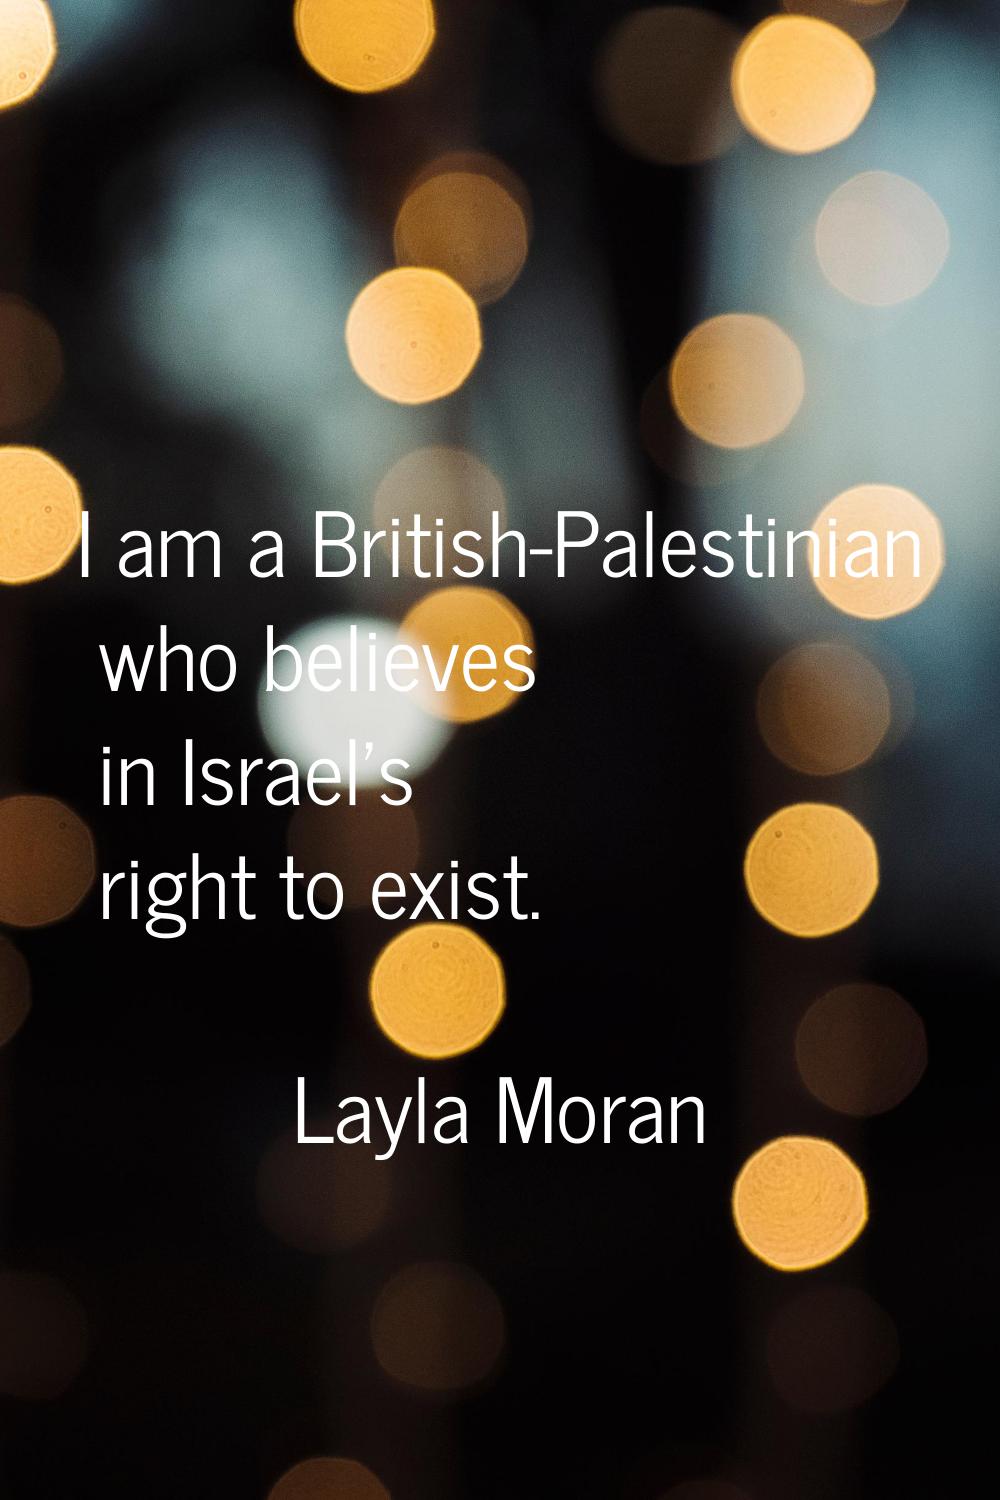 I am a British-Palestinian who believes in Israel’s right to exist.